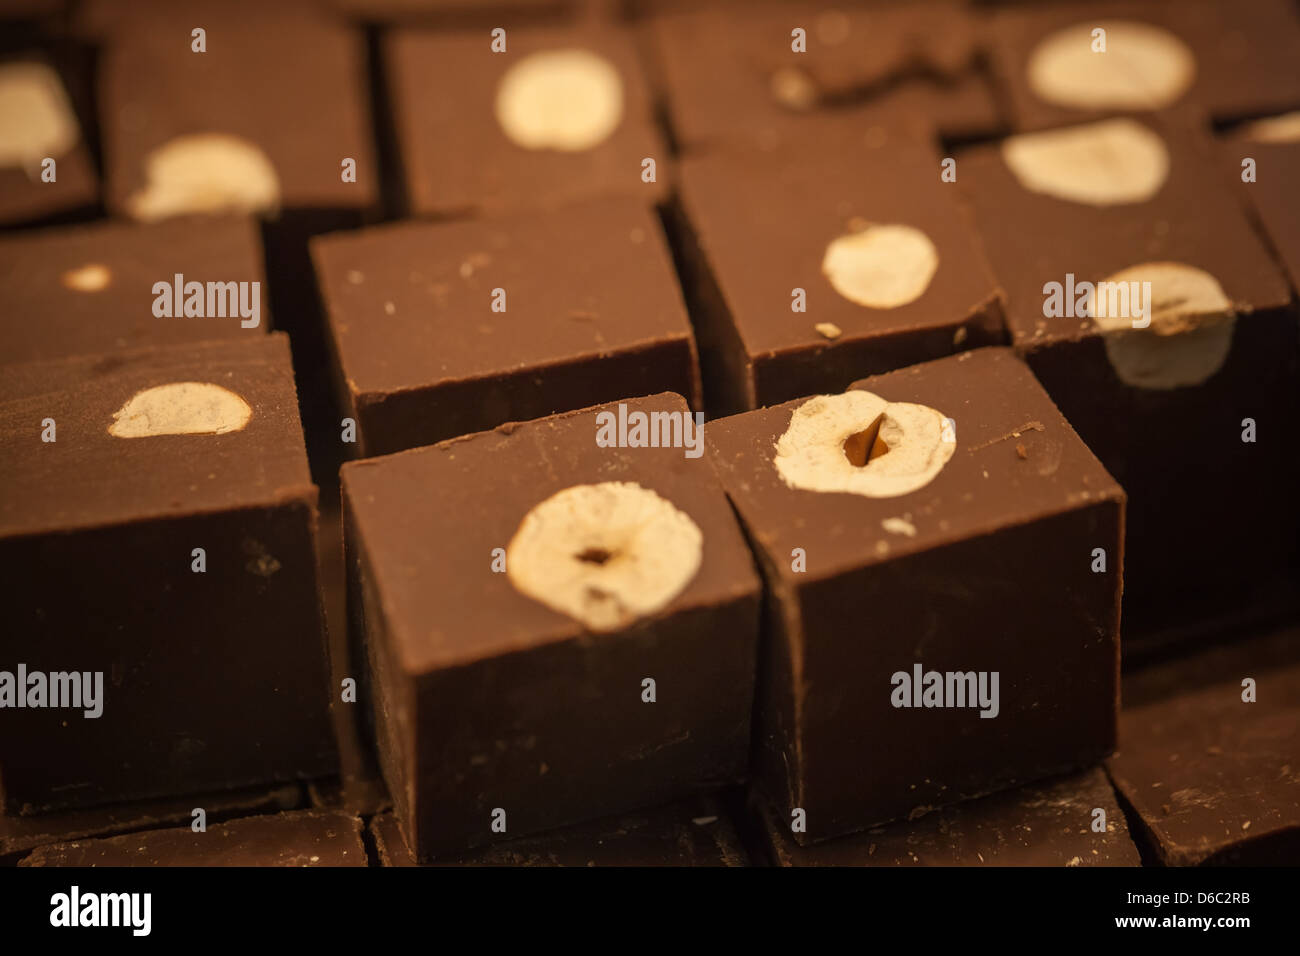 Dark chocolate blocks with hazelnuts on the counter. Macro photo with selective focus Stock Photo